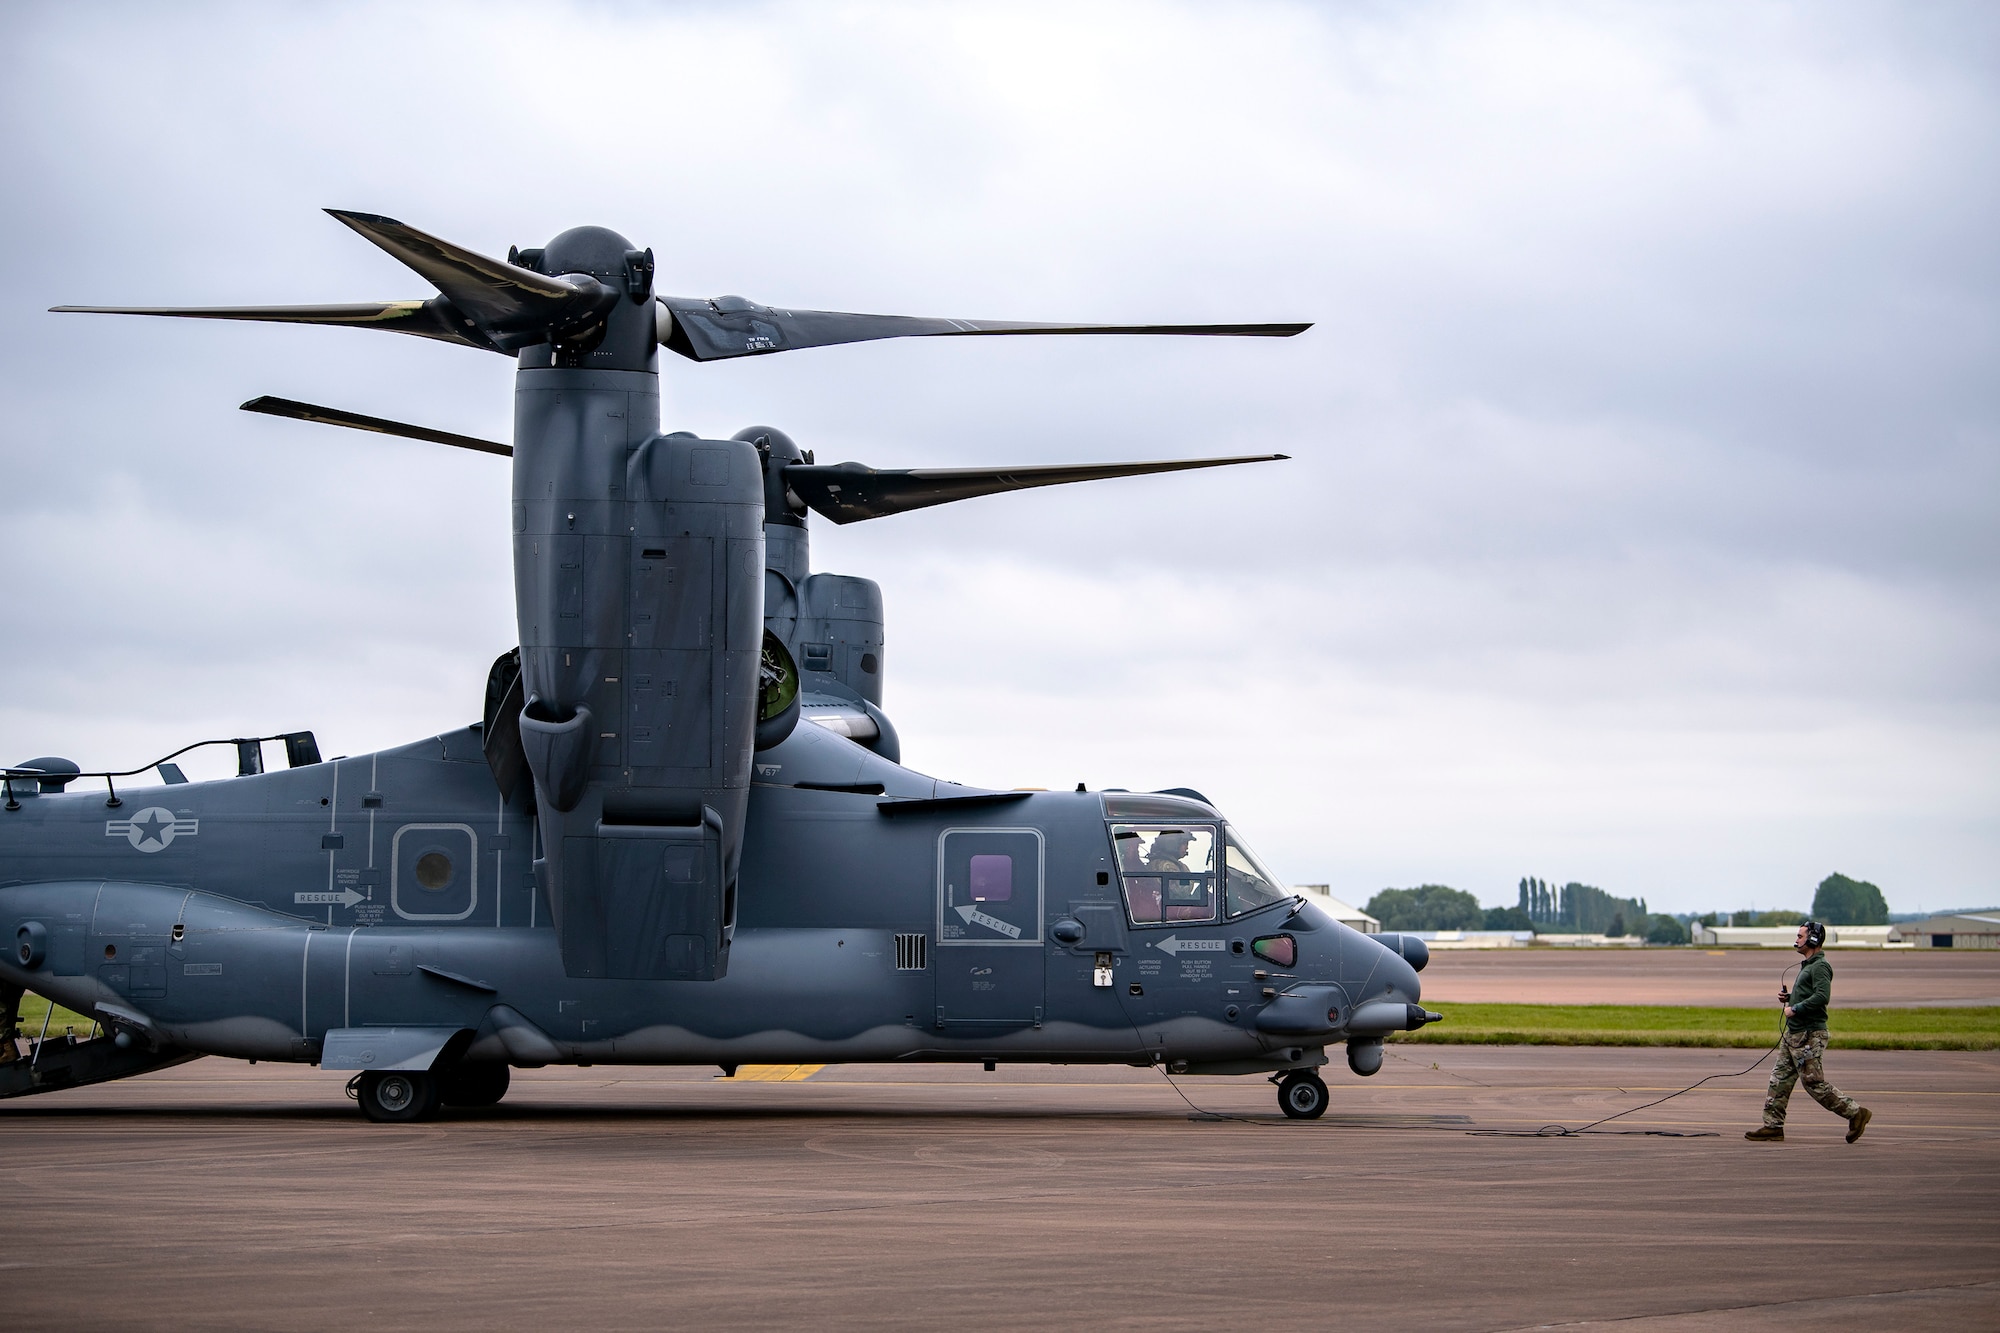 An Airman from the 352d Special Operations Wing prepares to marshall a CV-22A Osprey during an Agile Combat Employment exercise at RAF Fairford, England, Sept. 13, 2021. The exercise enables U.S. forces in Europe to operate from locations with varying levels of capacity and support. This further ensures Airmen and aircrews are postured to deliver lethal combat power across the full spectrum of military operations.(U.S. Air Force photo by Senior Airman Eugene Oliver)